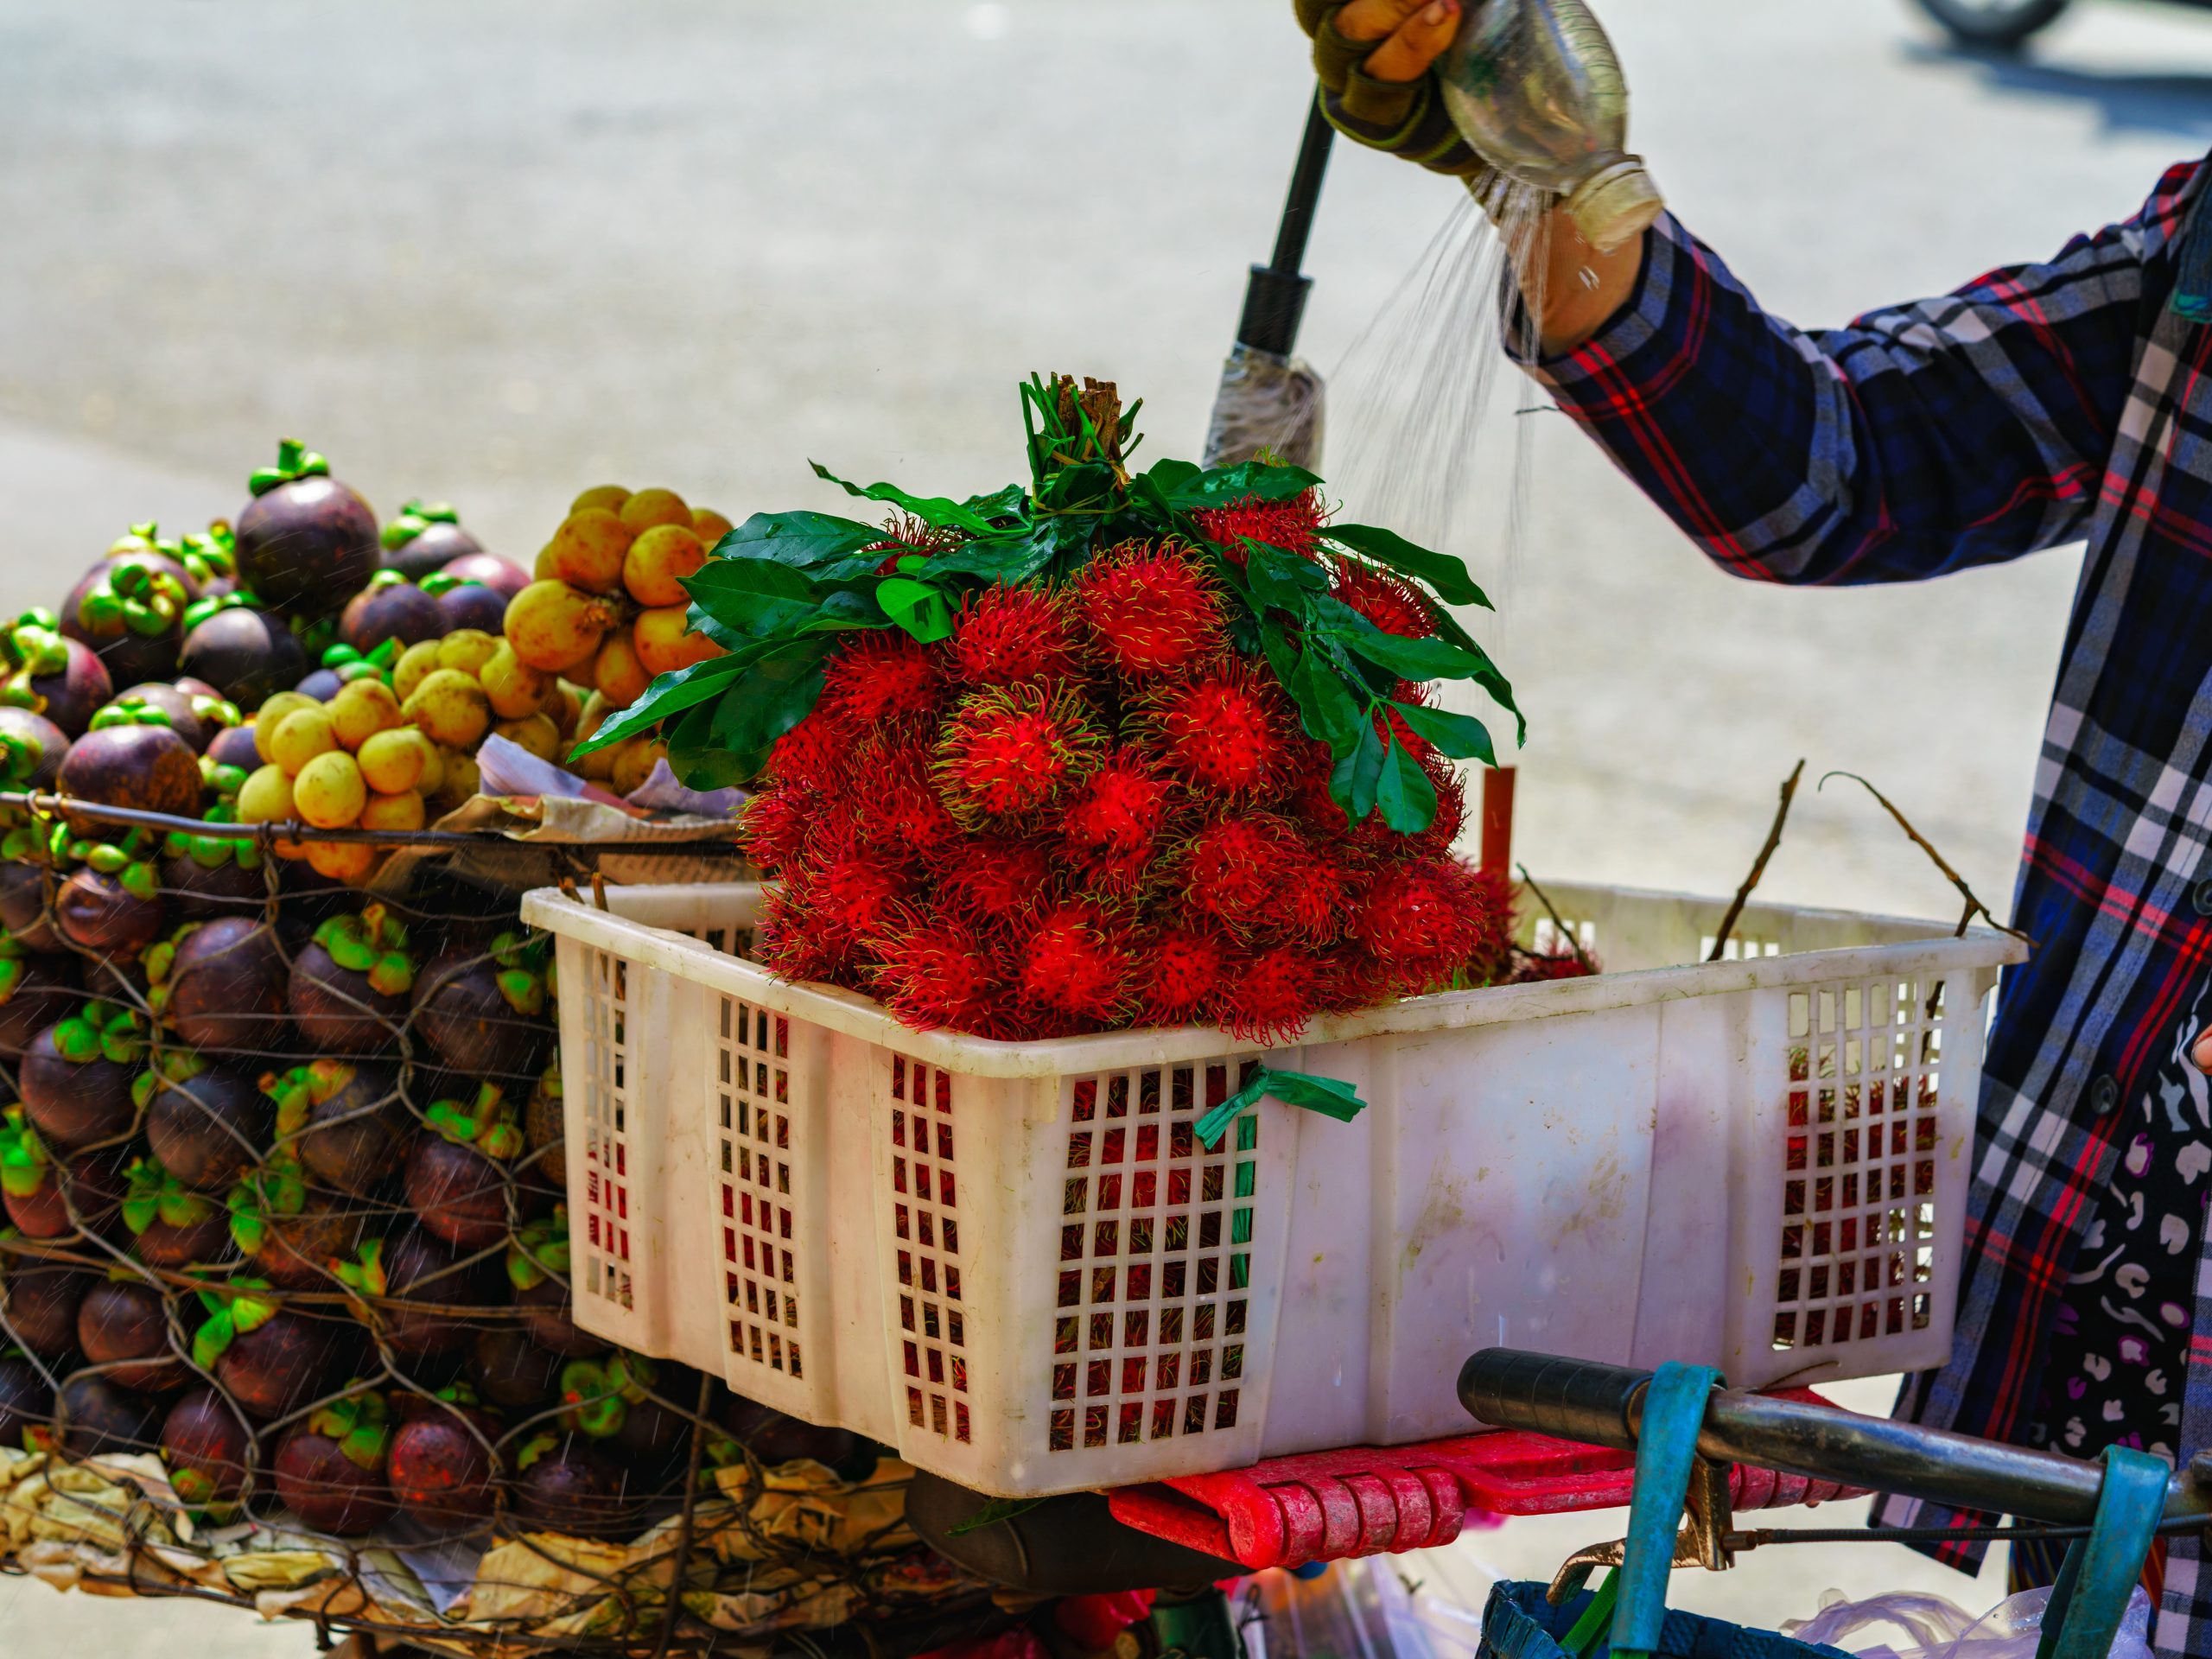 Vietnam Food and Beverage Insights Tour